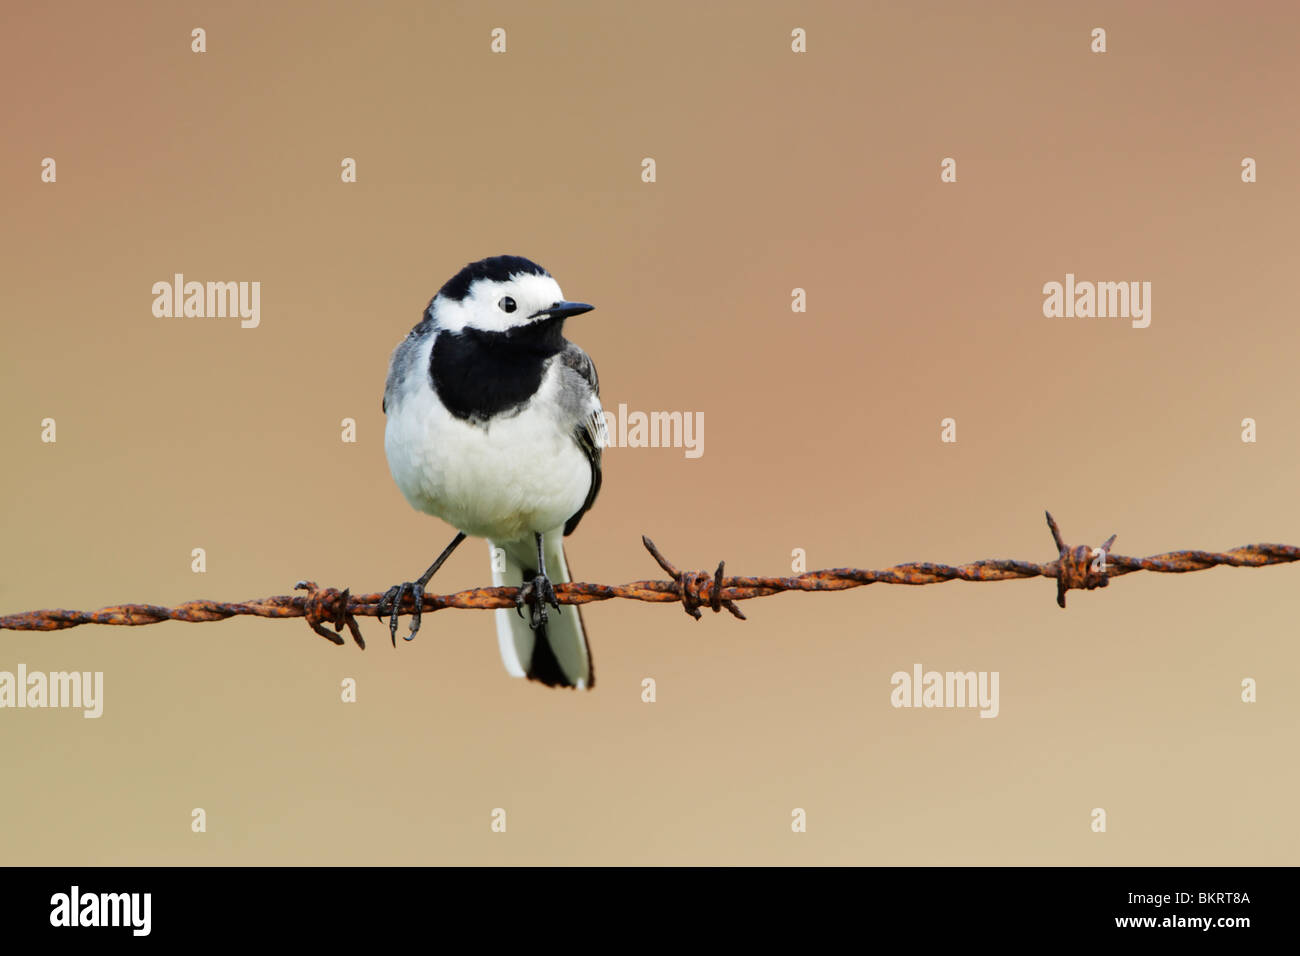 Pied or White wagtail (Motacilla alba) perched on barbed wire fence Stock Photo